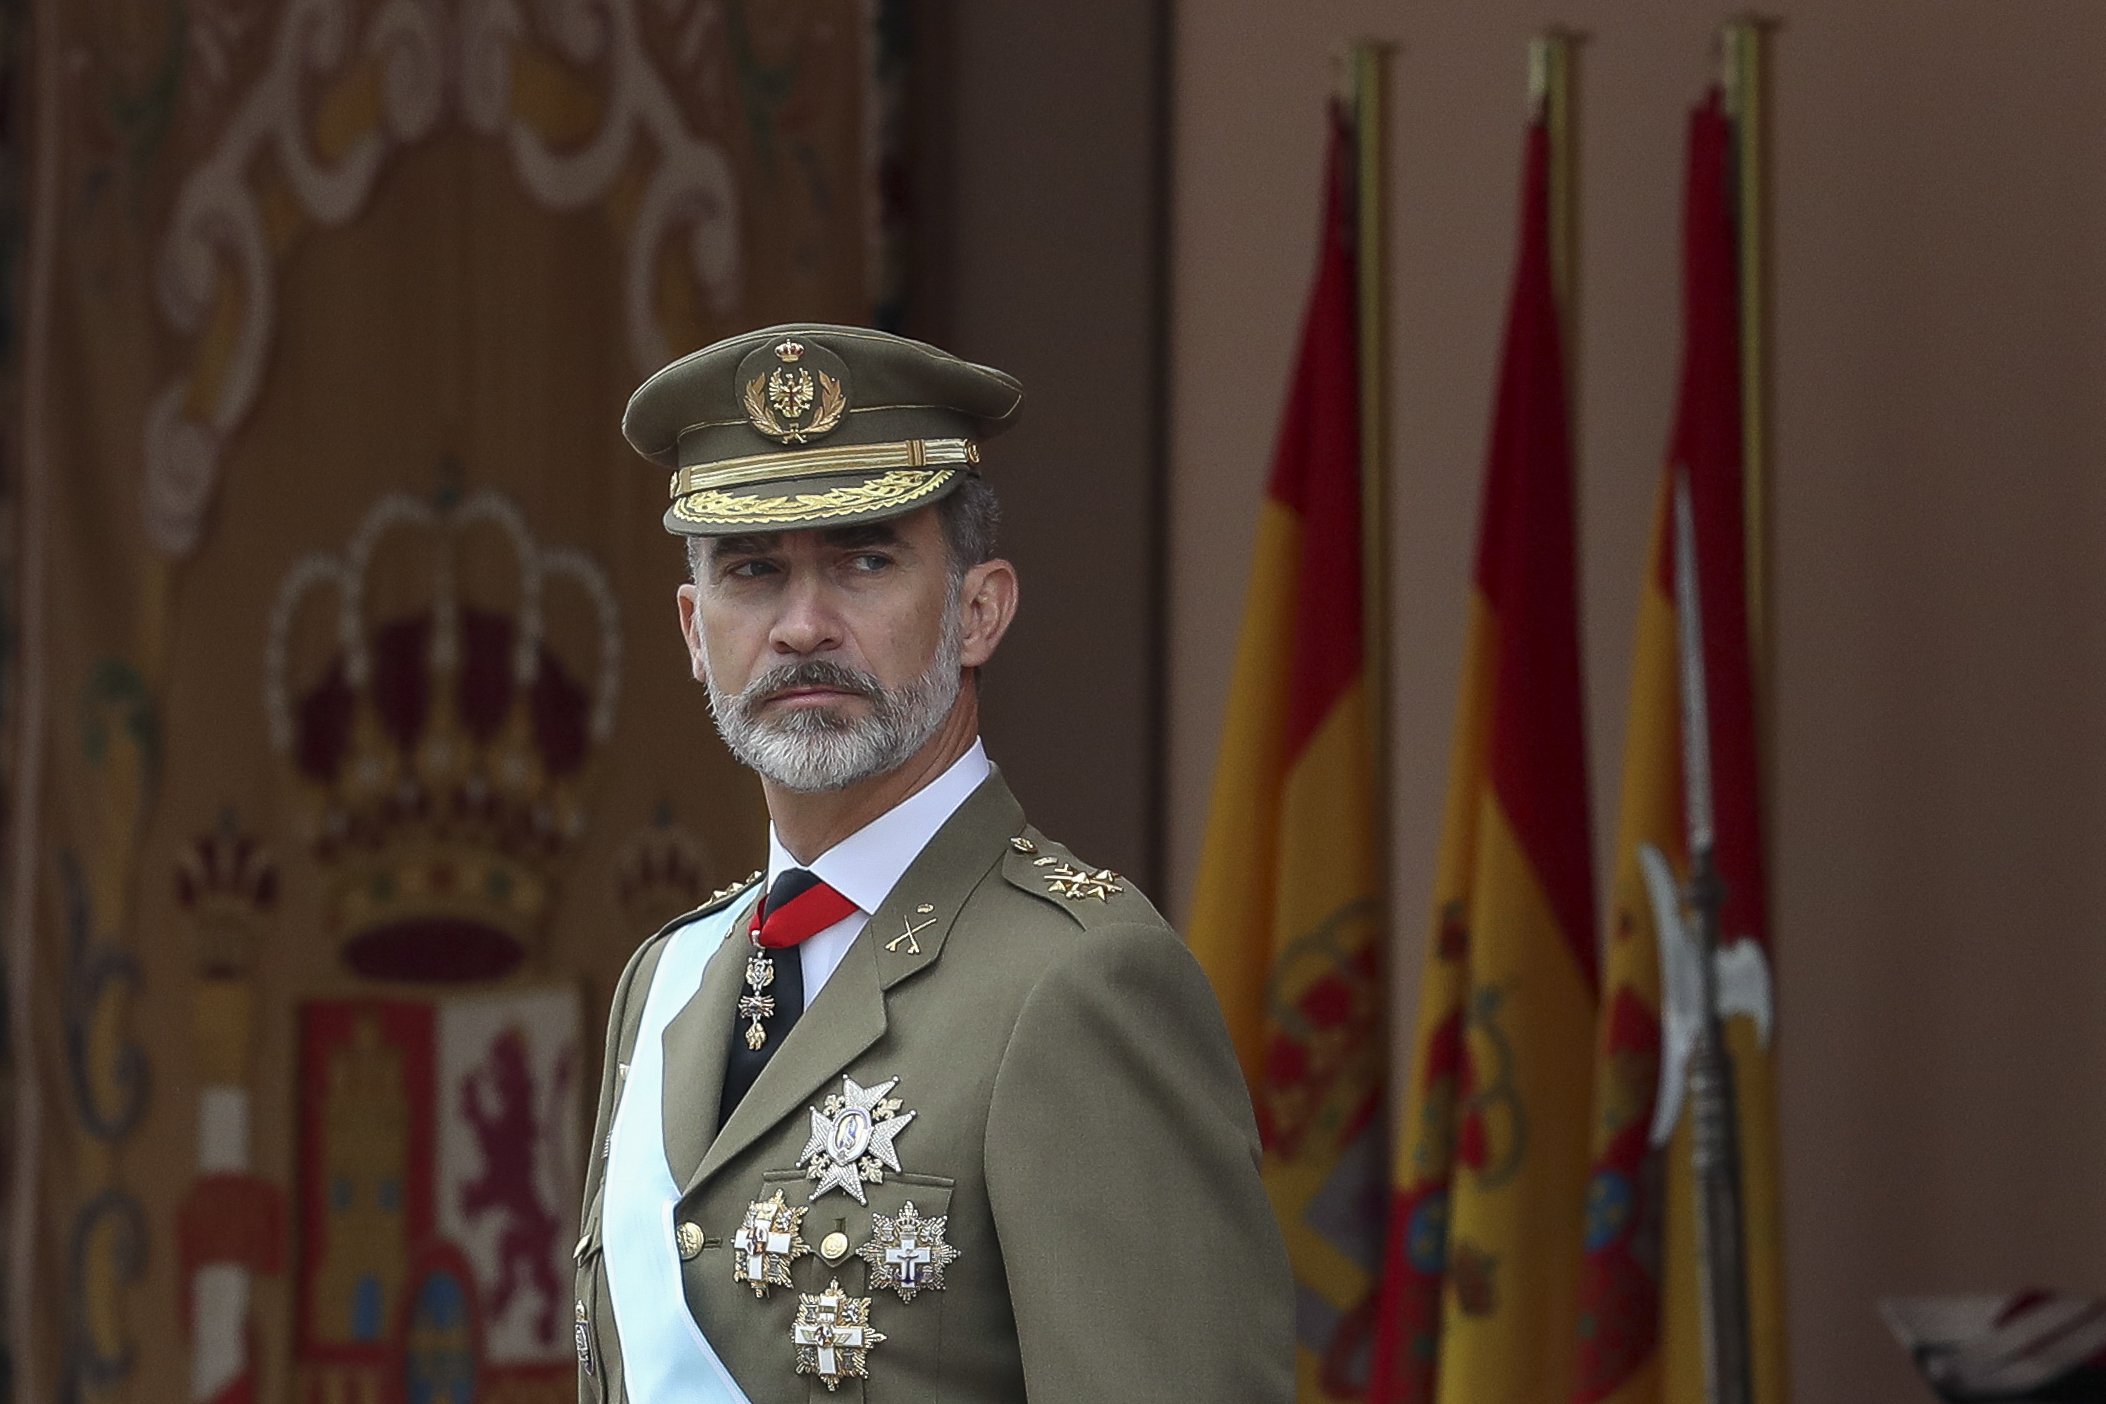 Catalan activists to protest king Felipe VI at opening of Mobile World Congress